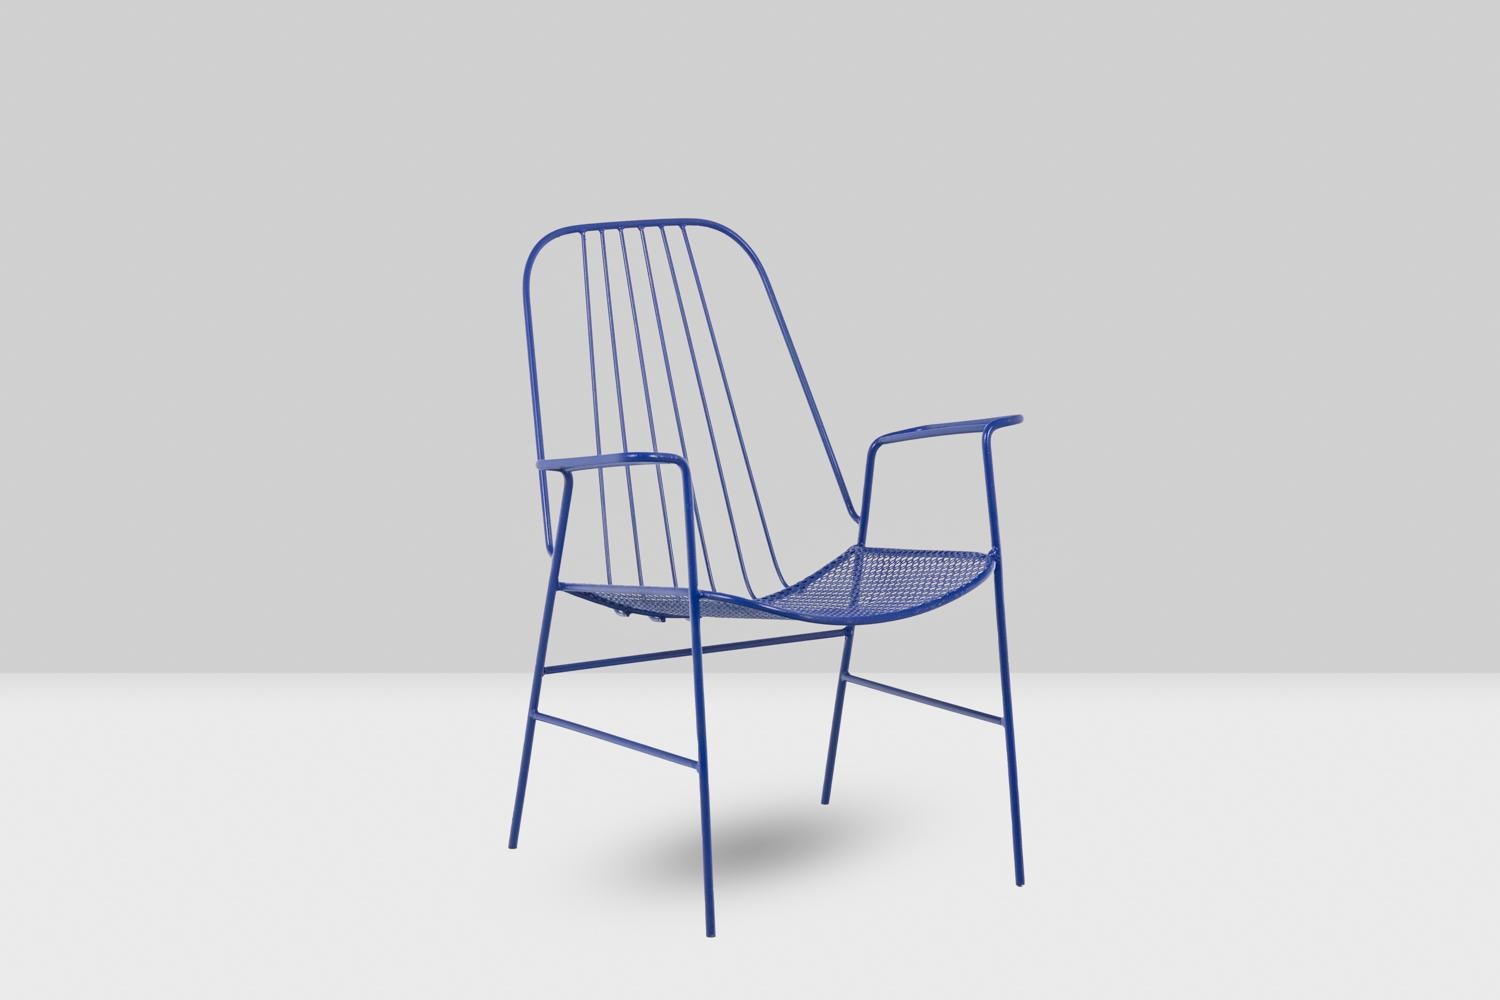 Mathieu Matégot, in the style of.

Pair of openwork iron armchairs, blue.

French work realized in the 1960s.